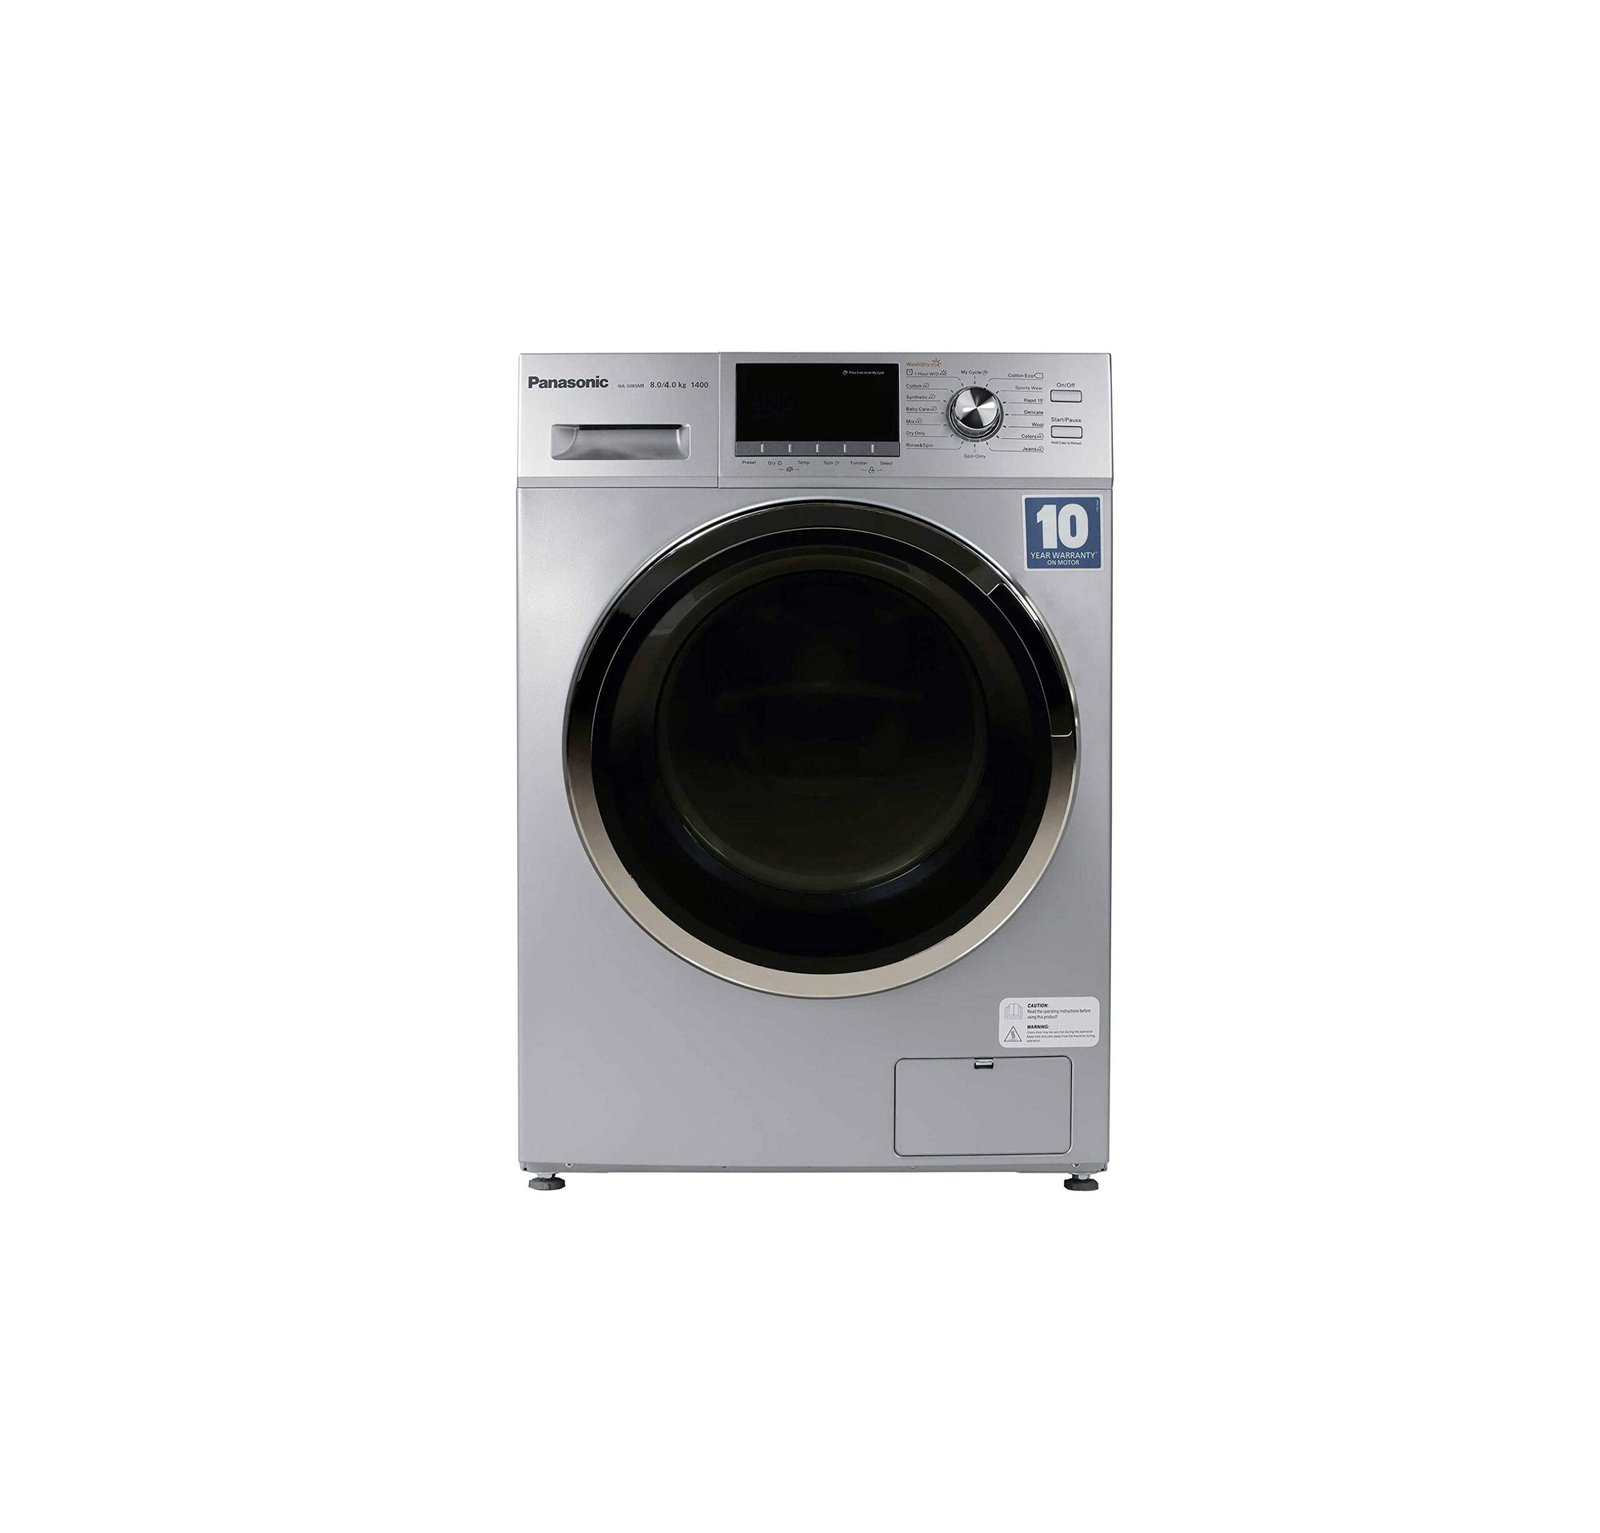 Panasonic 8/6 Kg Front Load Washer & Dryer Color Silver Model-NAS086M3 | 1 Year Full 10 Years Motor Warranty.